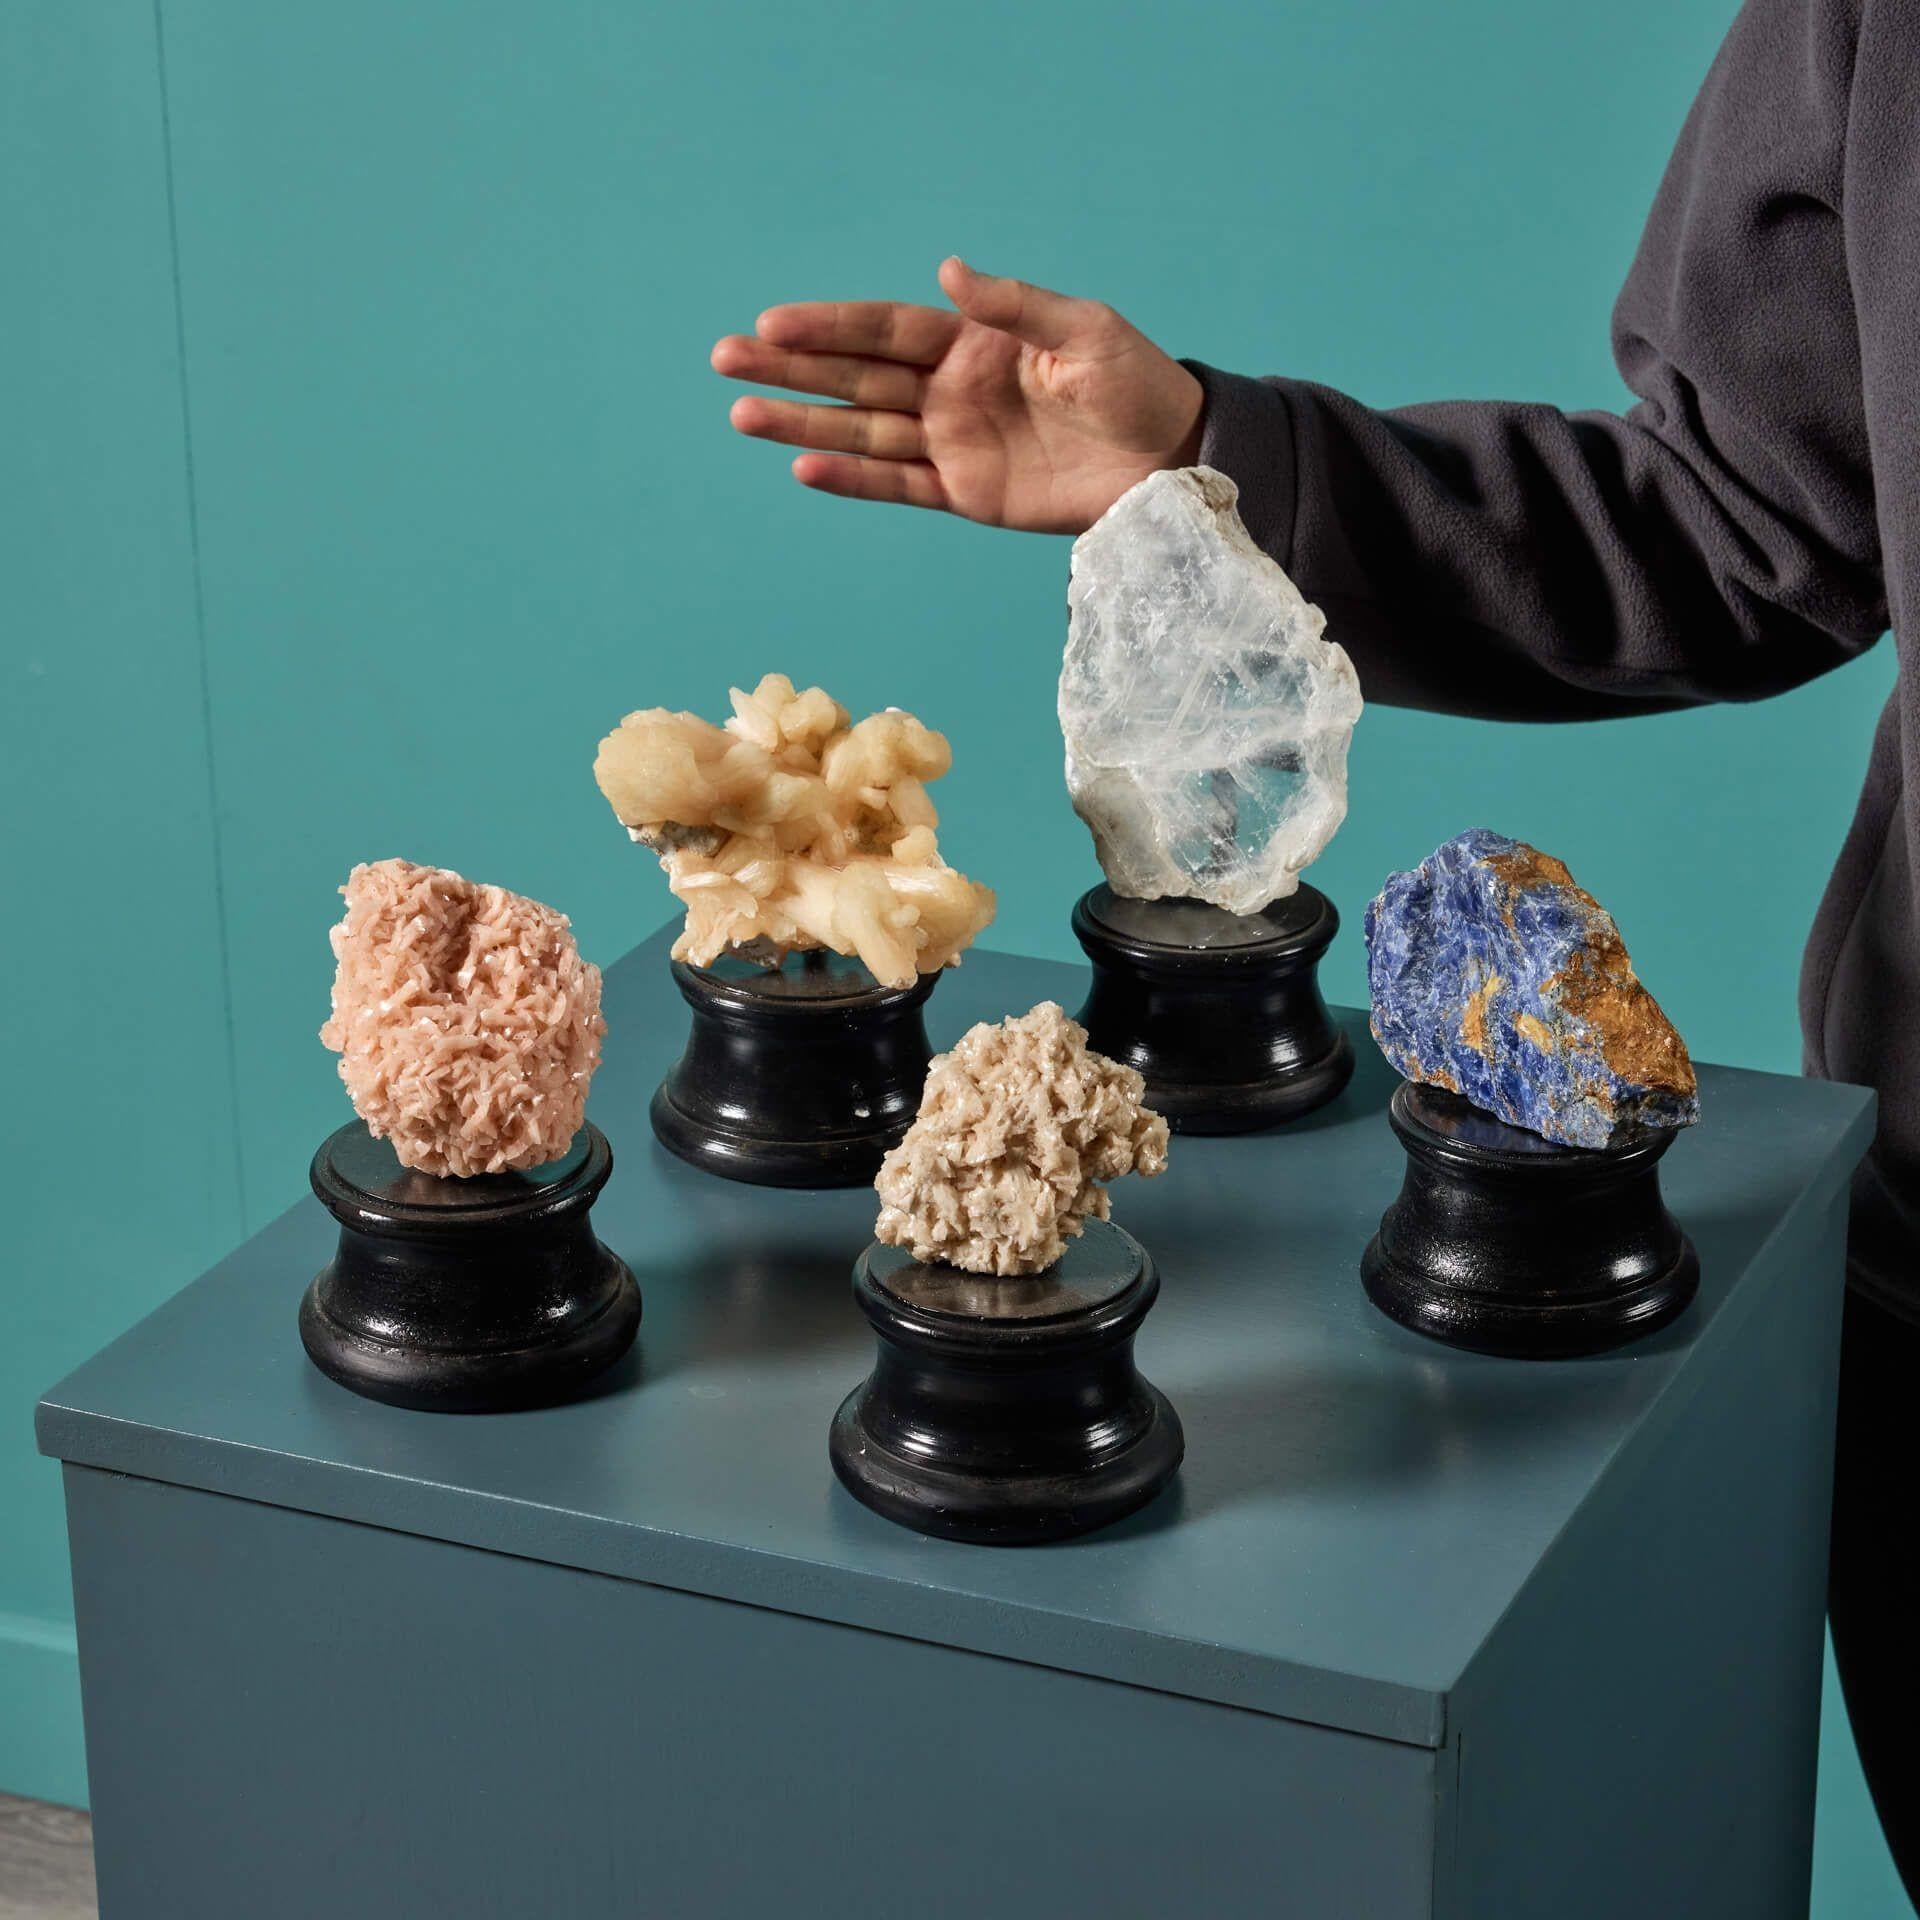 A varied and fascinating collection of 5 natural mineral specimens, each presented on an exclusive small painted plaster plinth.

Ex. private British collection, this group contains a range of impressive cabinet specimens, some with original labels